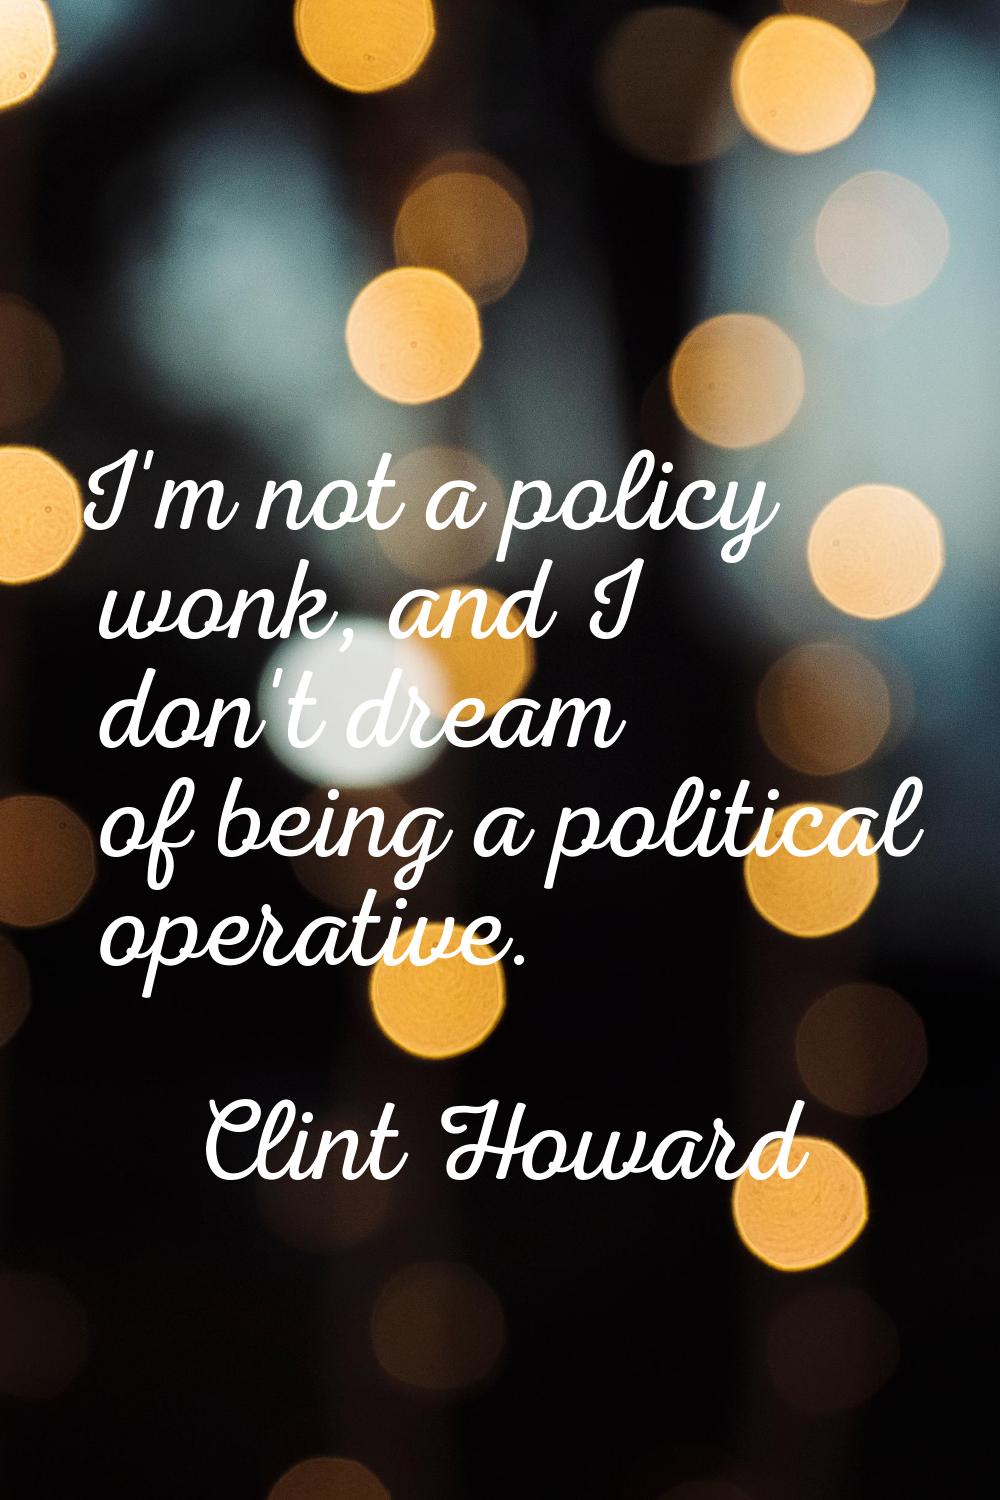 I'm not a policy wonk, and I don't dream of being a political operative.